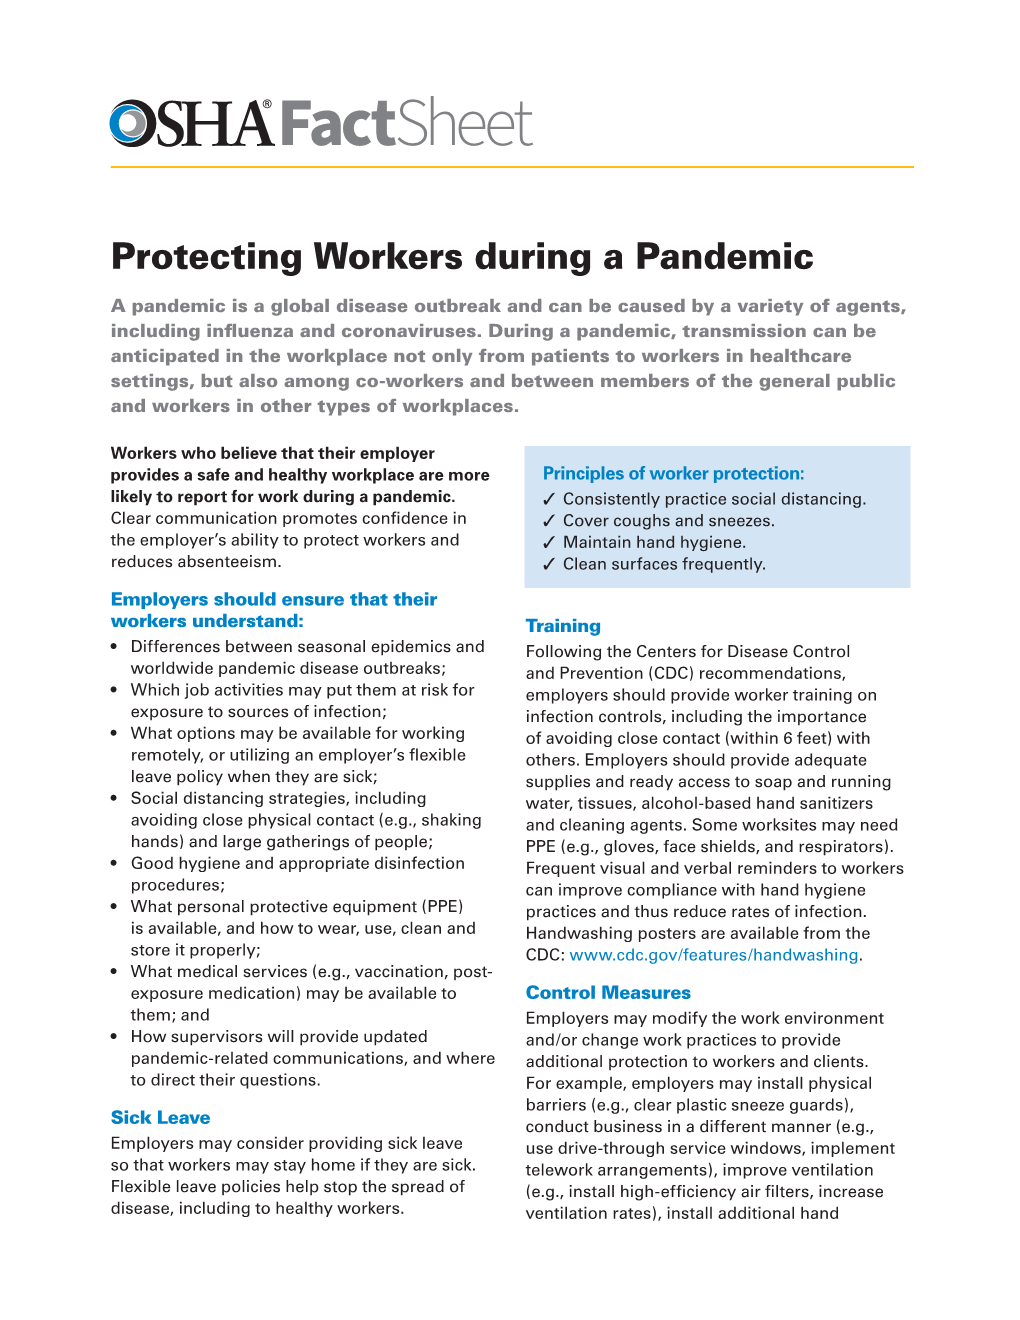 Protecting Workers During a Pandemic